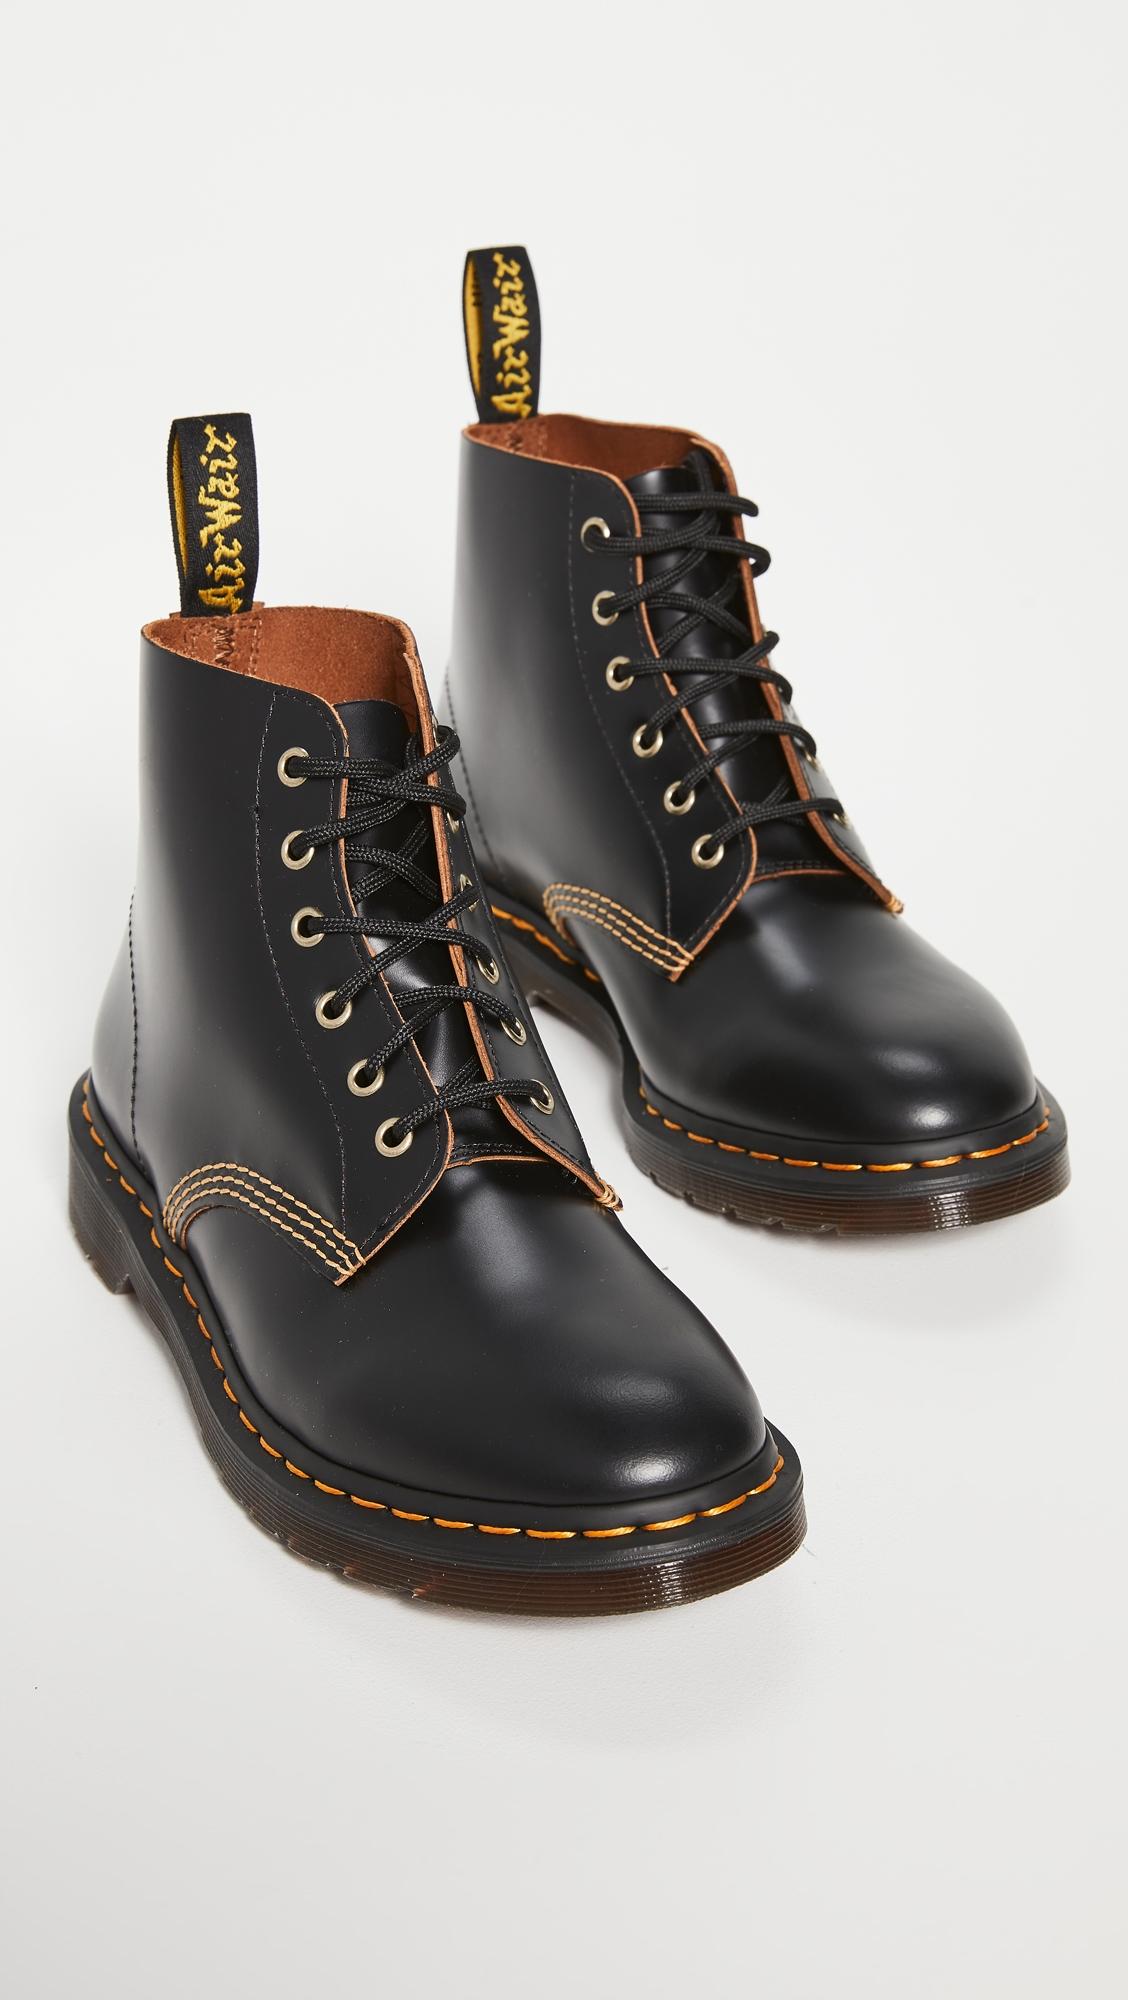 Dr. Martens Leather 101 Arc 6 Eye Boots in Black for Men - Lyst